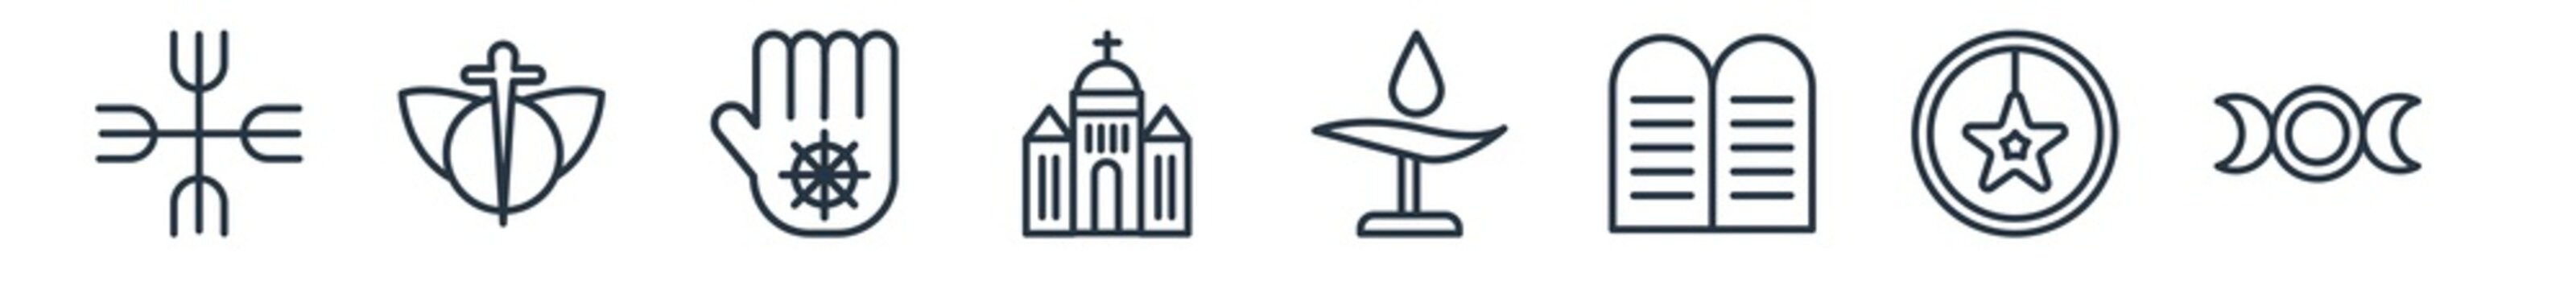 linear set of religion outline icons. line vector icons such as paganism, heresy, jainism, vatican, unitarian universalism, goddess vector illustration.